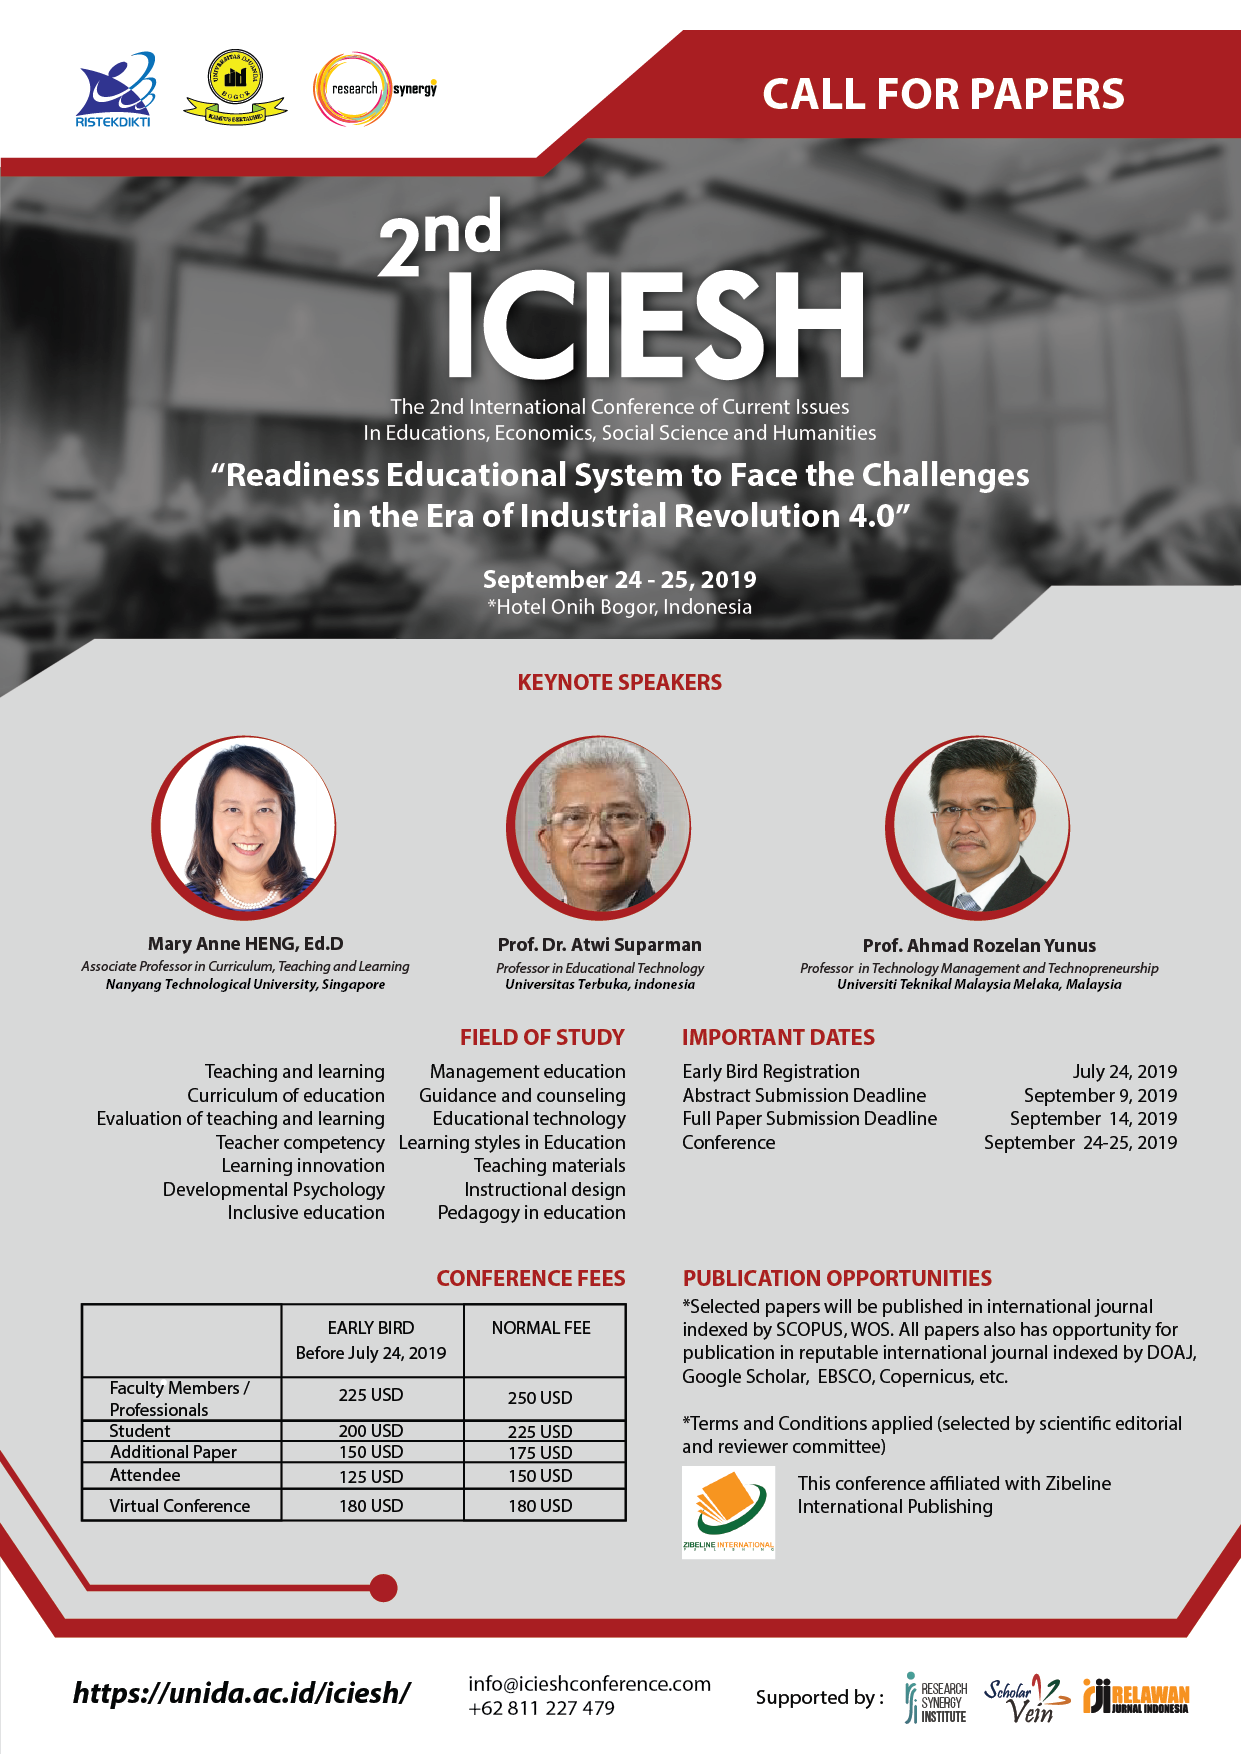 2nd International Conference of Current Issues in Educations, Economics, Social Science and Humanities (2nd ICIESH)